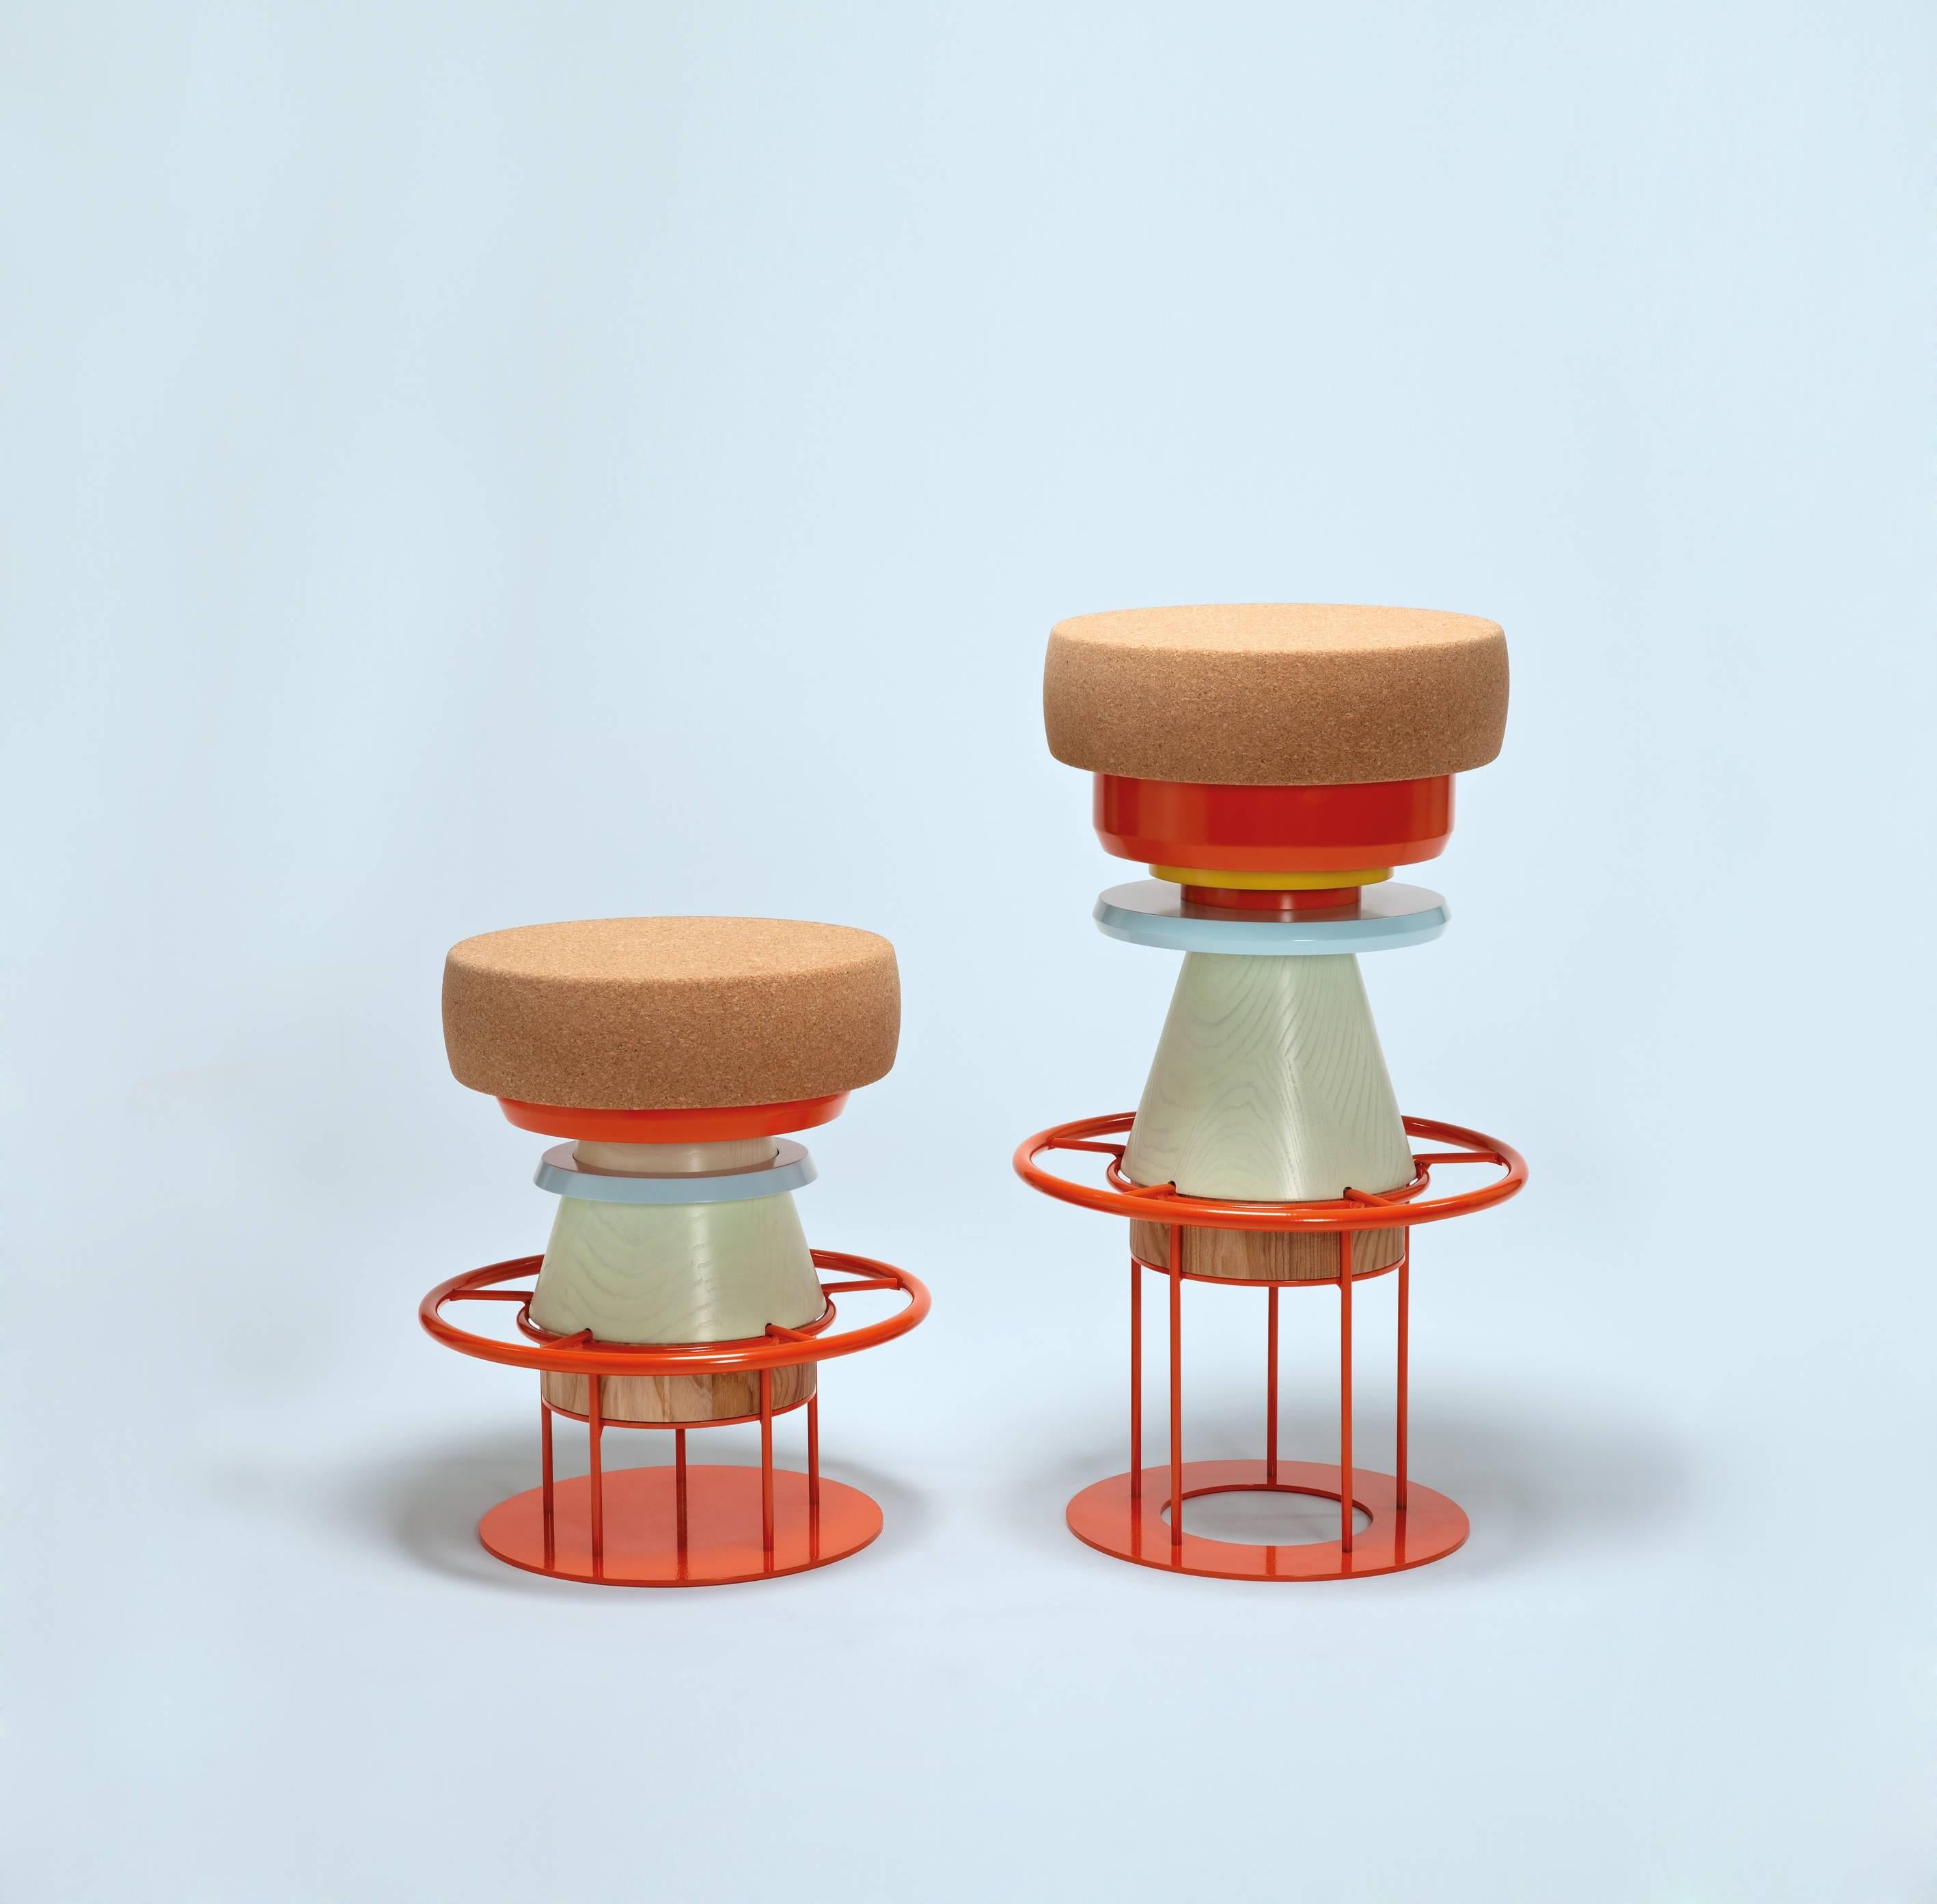 Colorful tembo stool - Note Design Studio

Measures: Height 19 inches (low stool) or 30.3 inches (high stool)
Diameter 14 inches
Weight: 30.8 lbs (low stool) or 37.5 lbs (high stool)

Materials and construction: Lacquered steel structure,